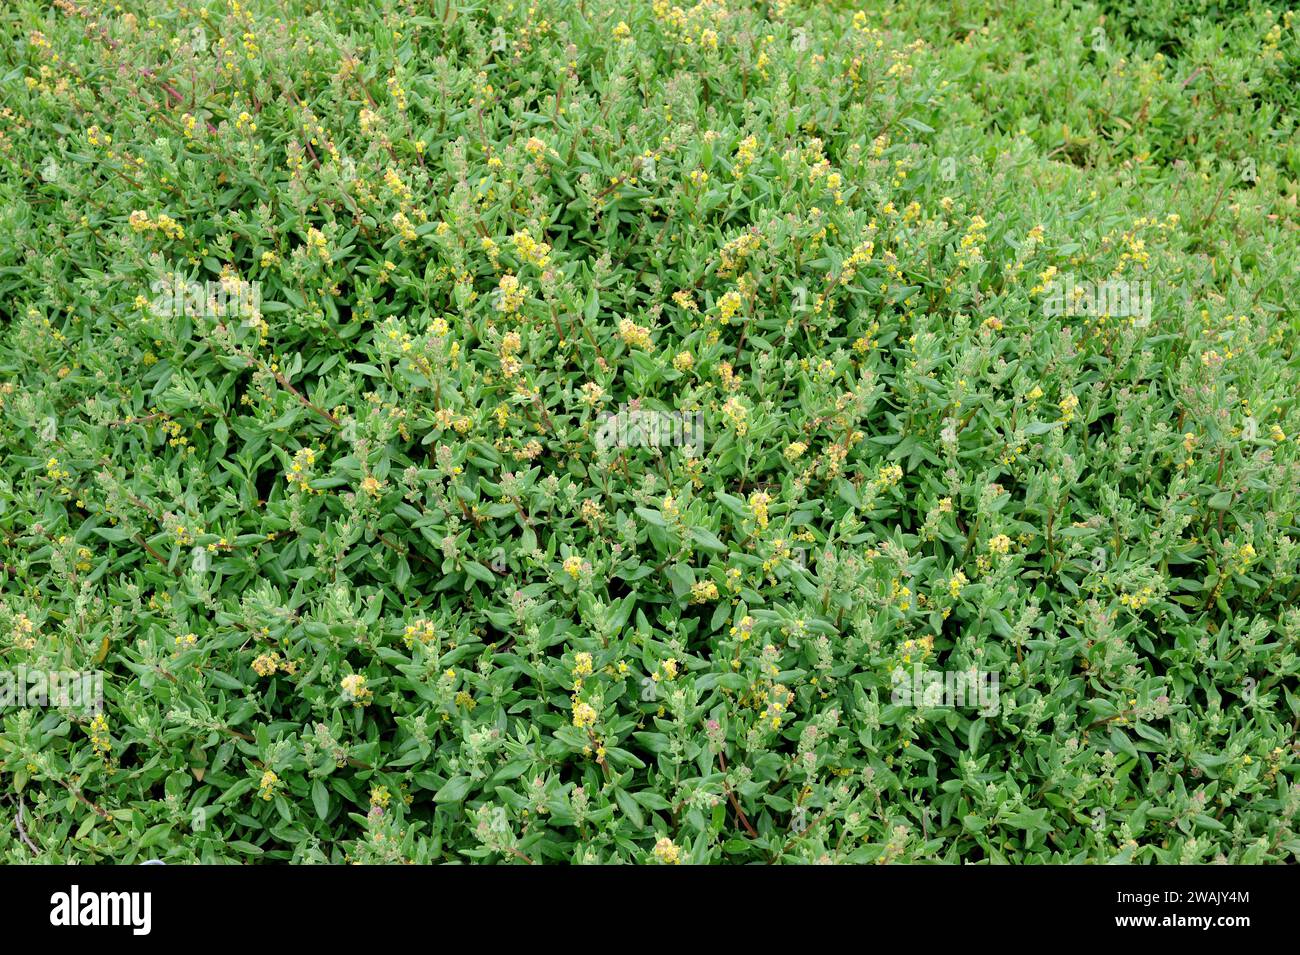 Dune spinach or sea spinach (Tetragonia decumbens) is an edible shrub native to South Africa and naturalized in Australia. Stock Photo